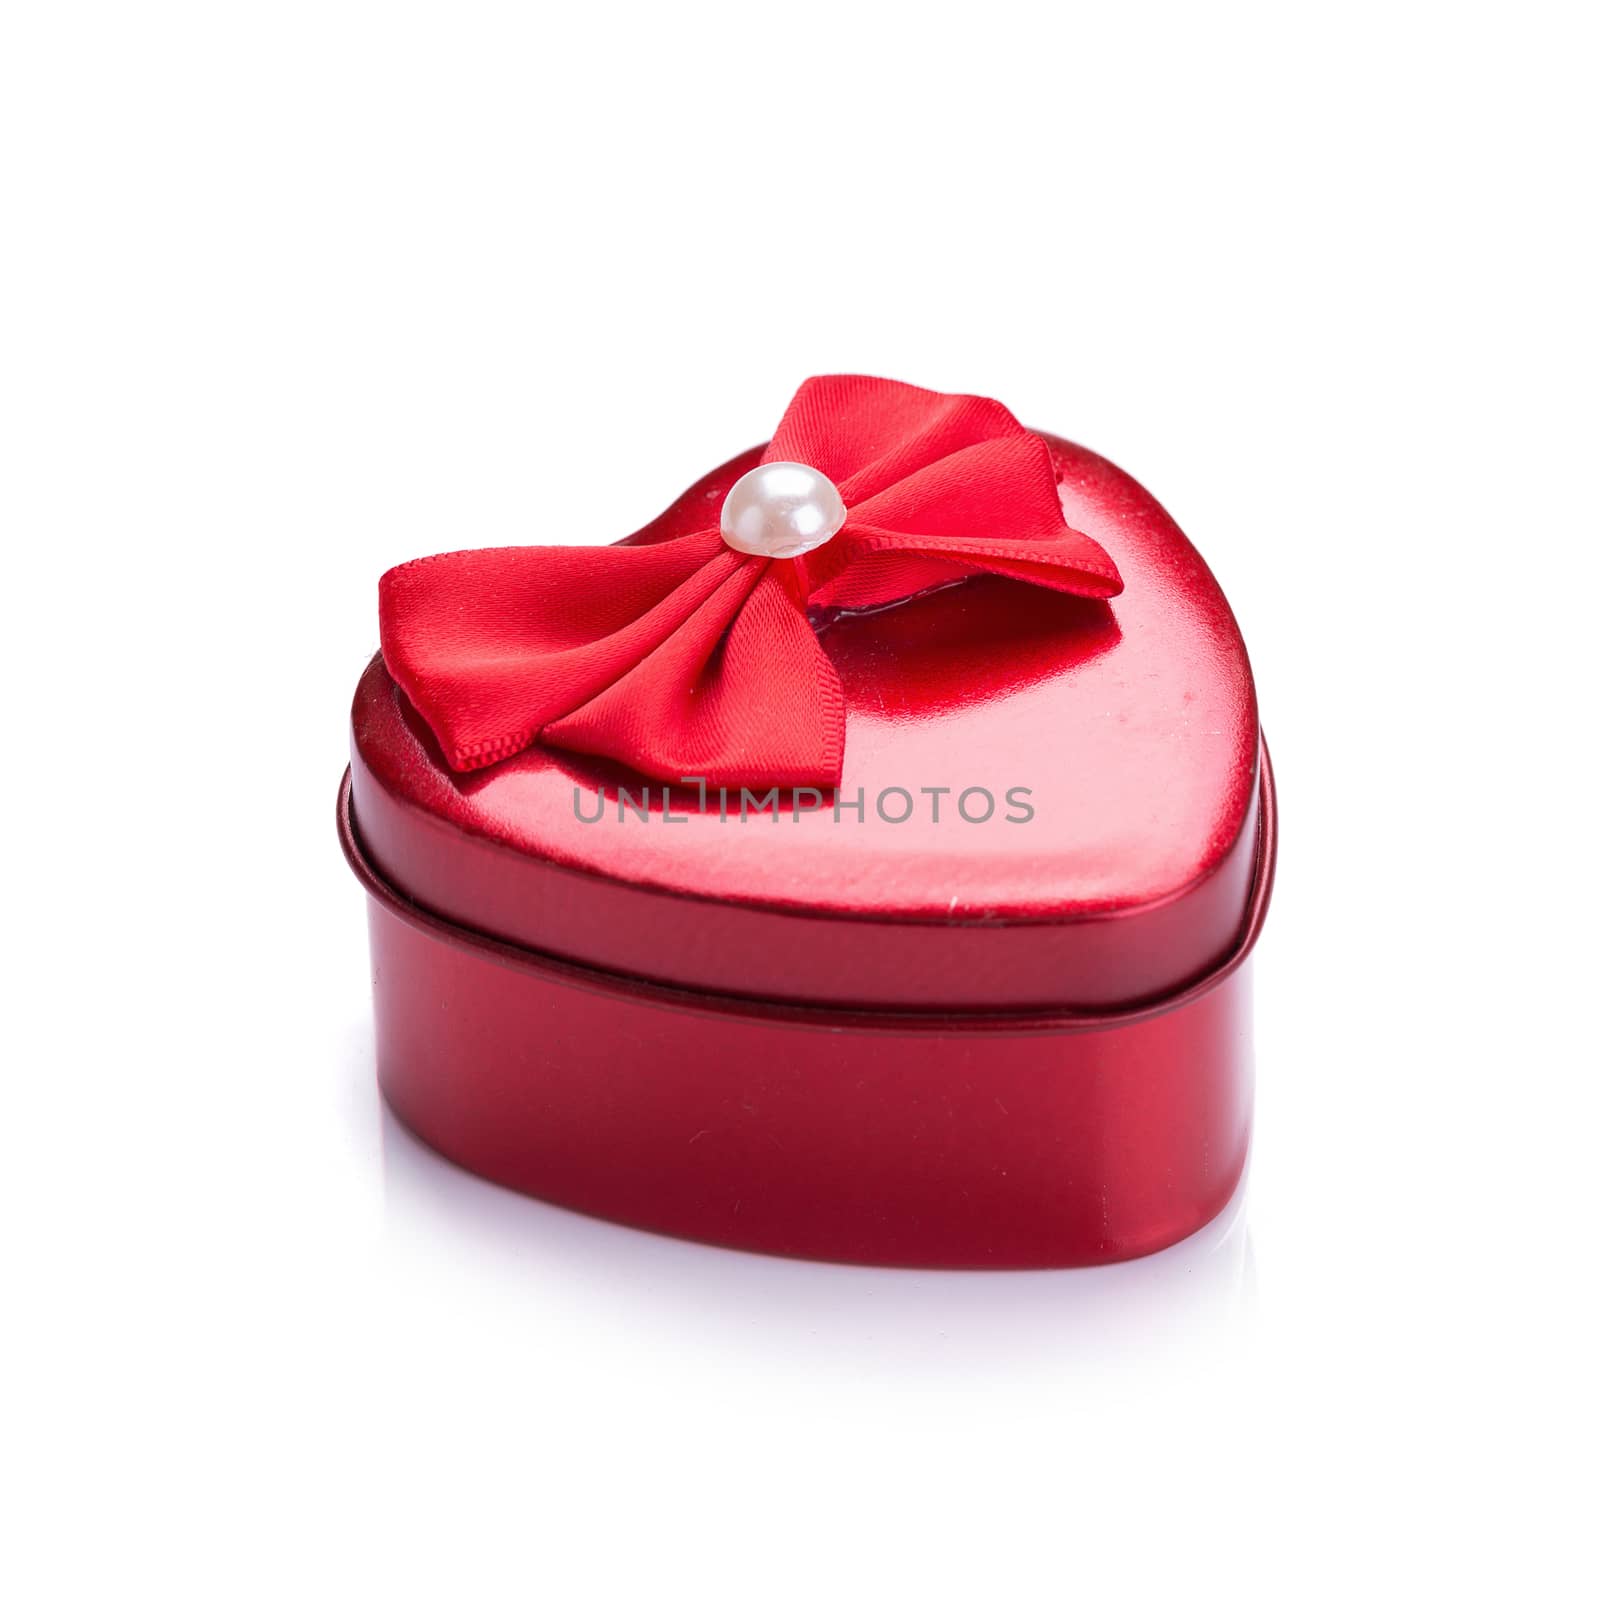 Red heart metal box on white background by kaiskynet